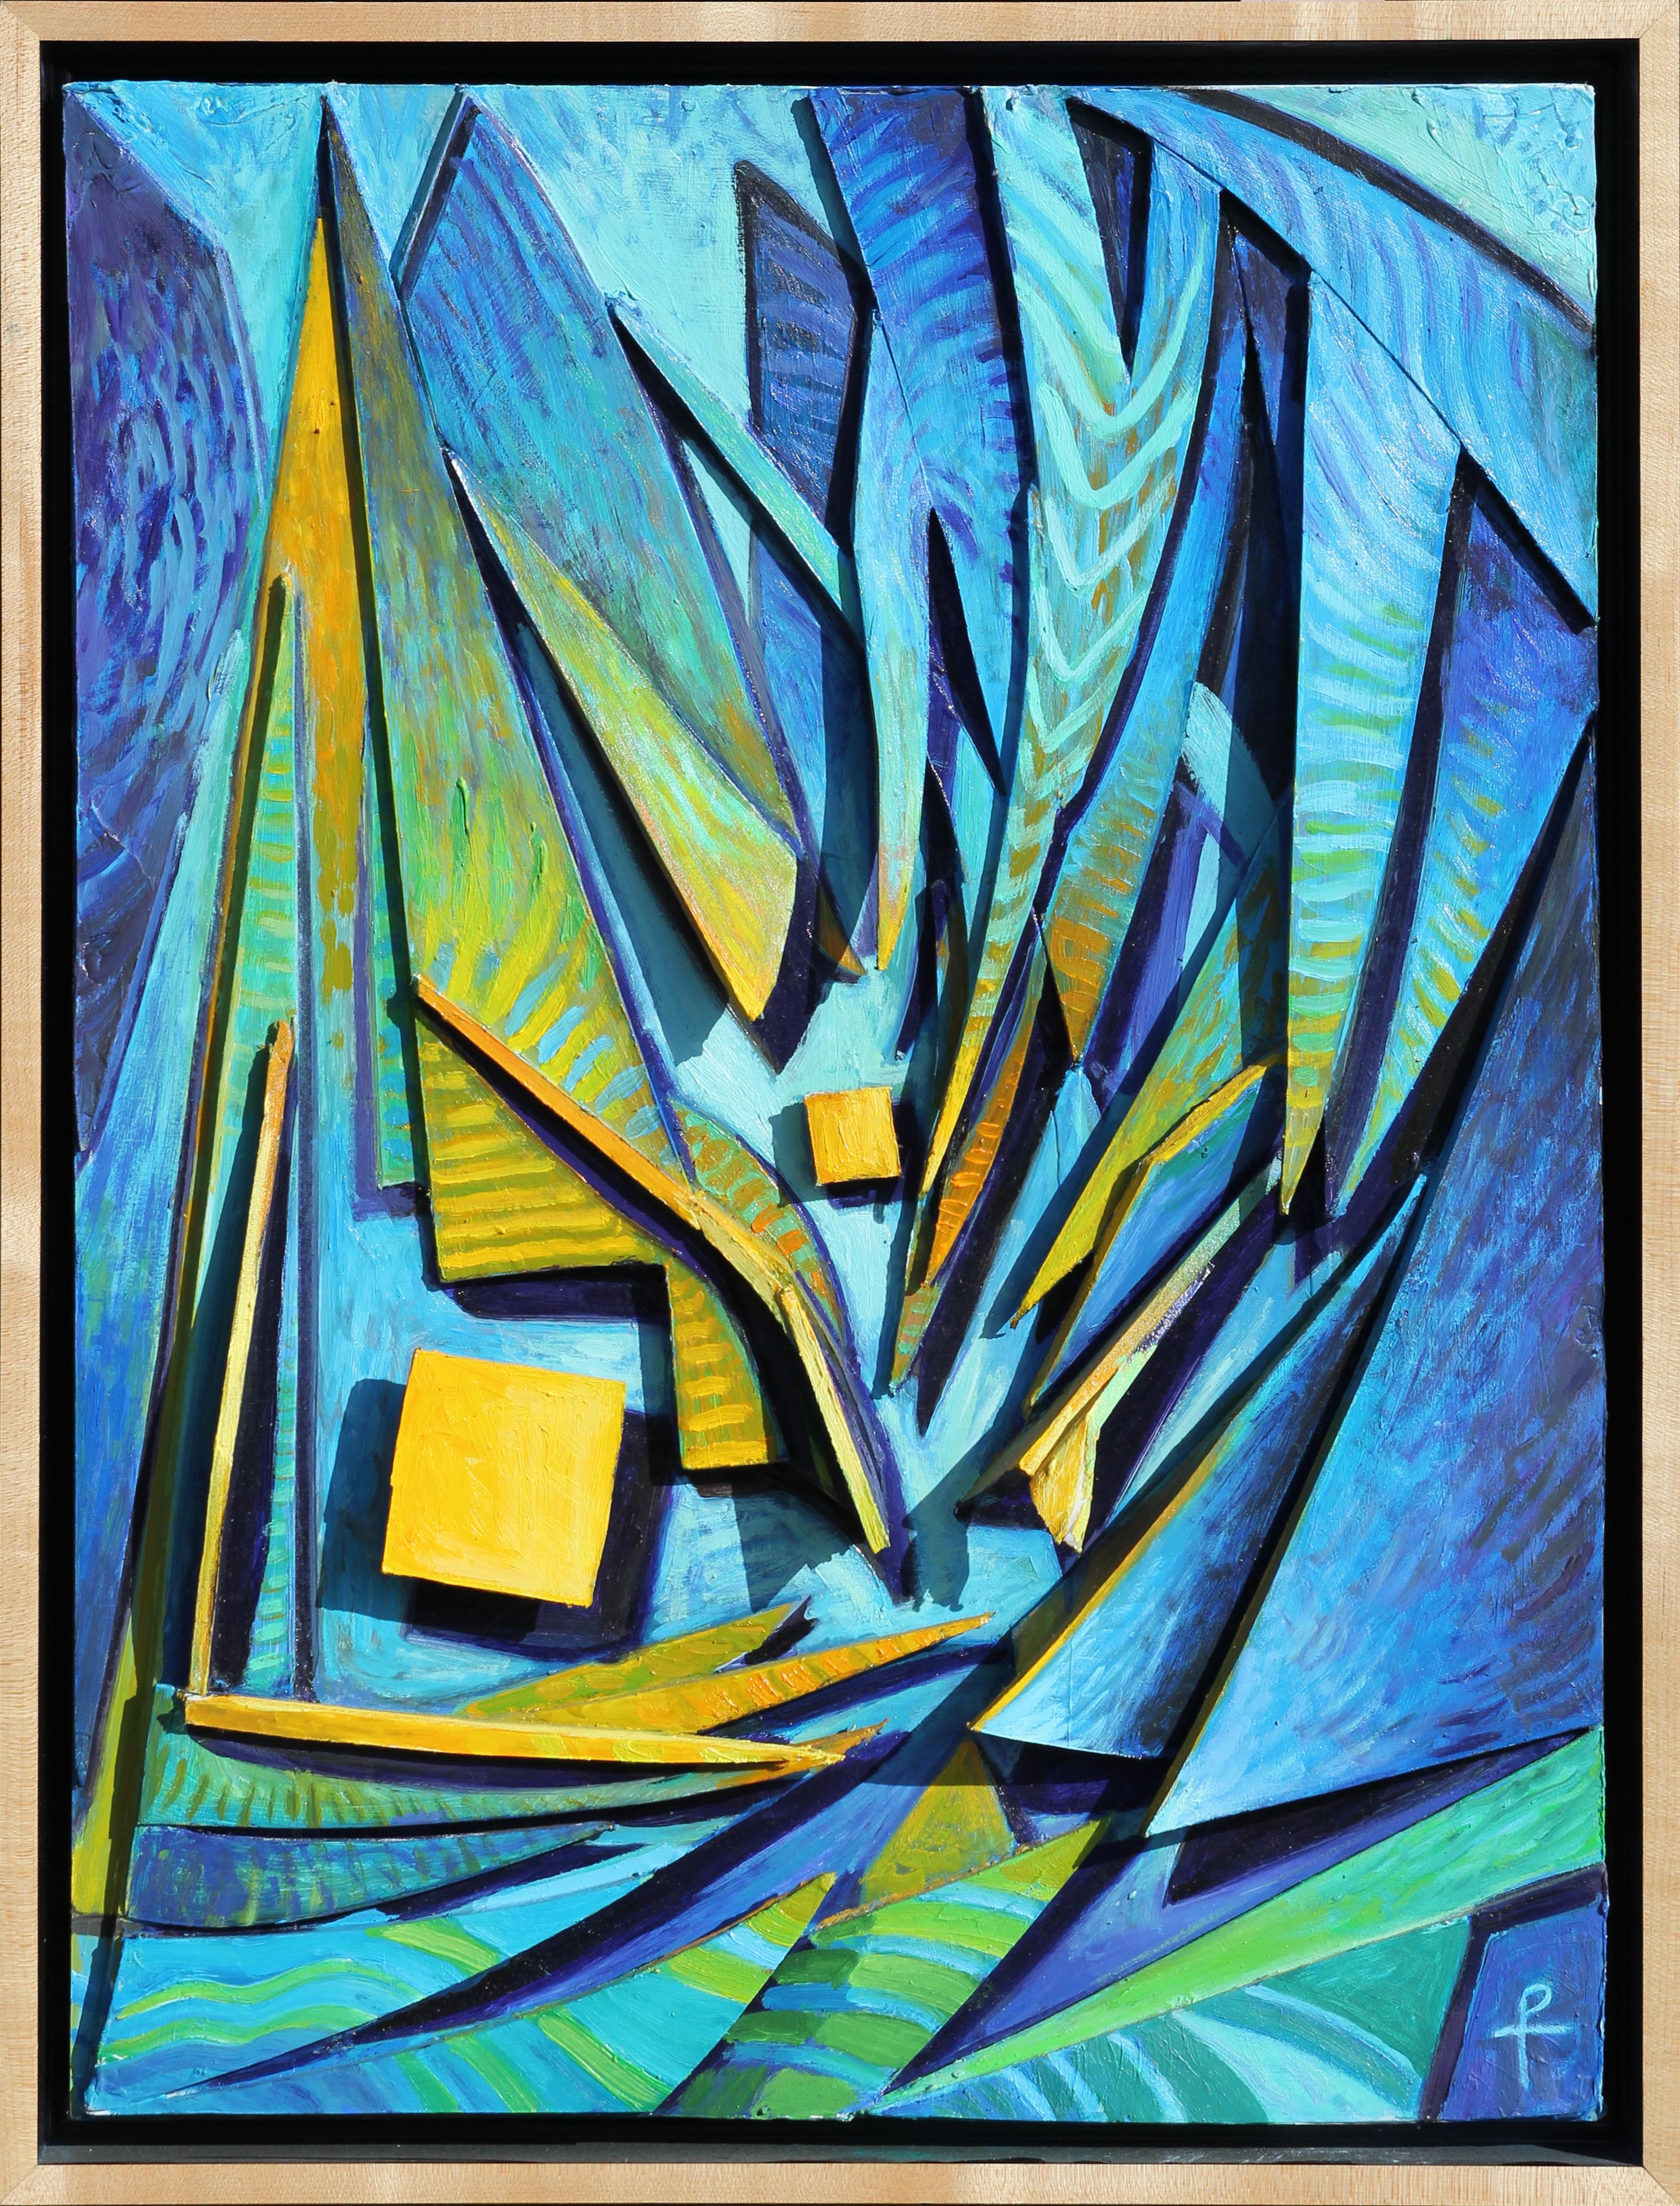 Henry David Potwin Abstract Painting - "Sailing" Blue and Yellow Abstract Geometric Sculptural Painting of Sailboats